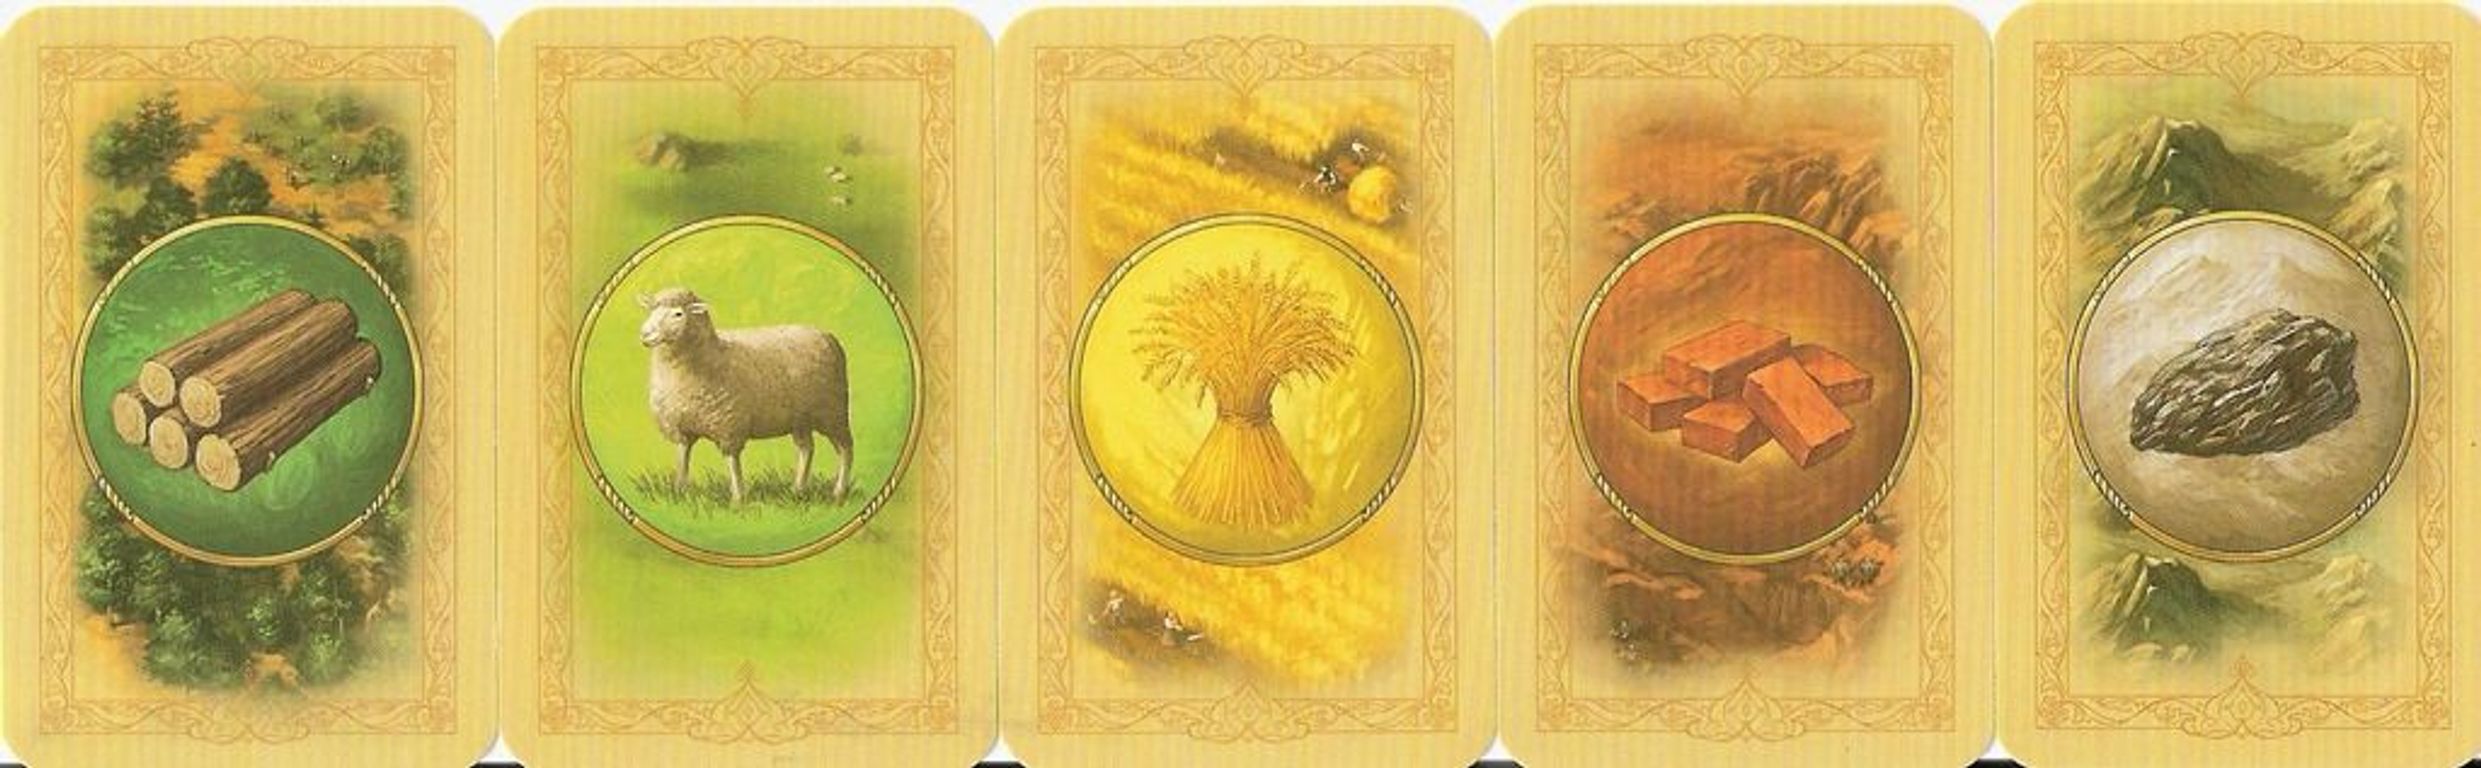 Catan Geographies: Germany cards